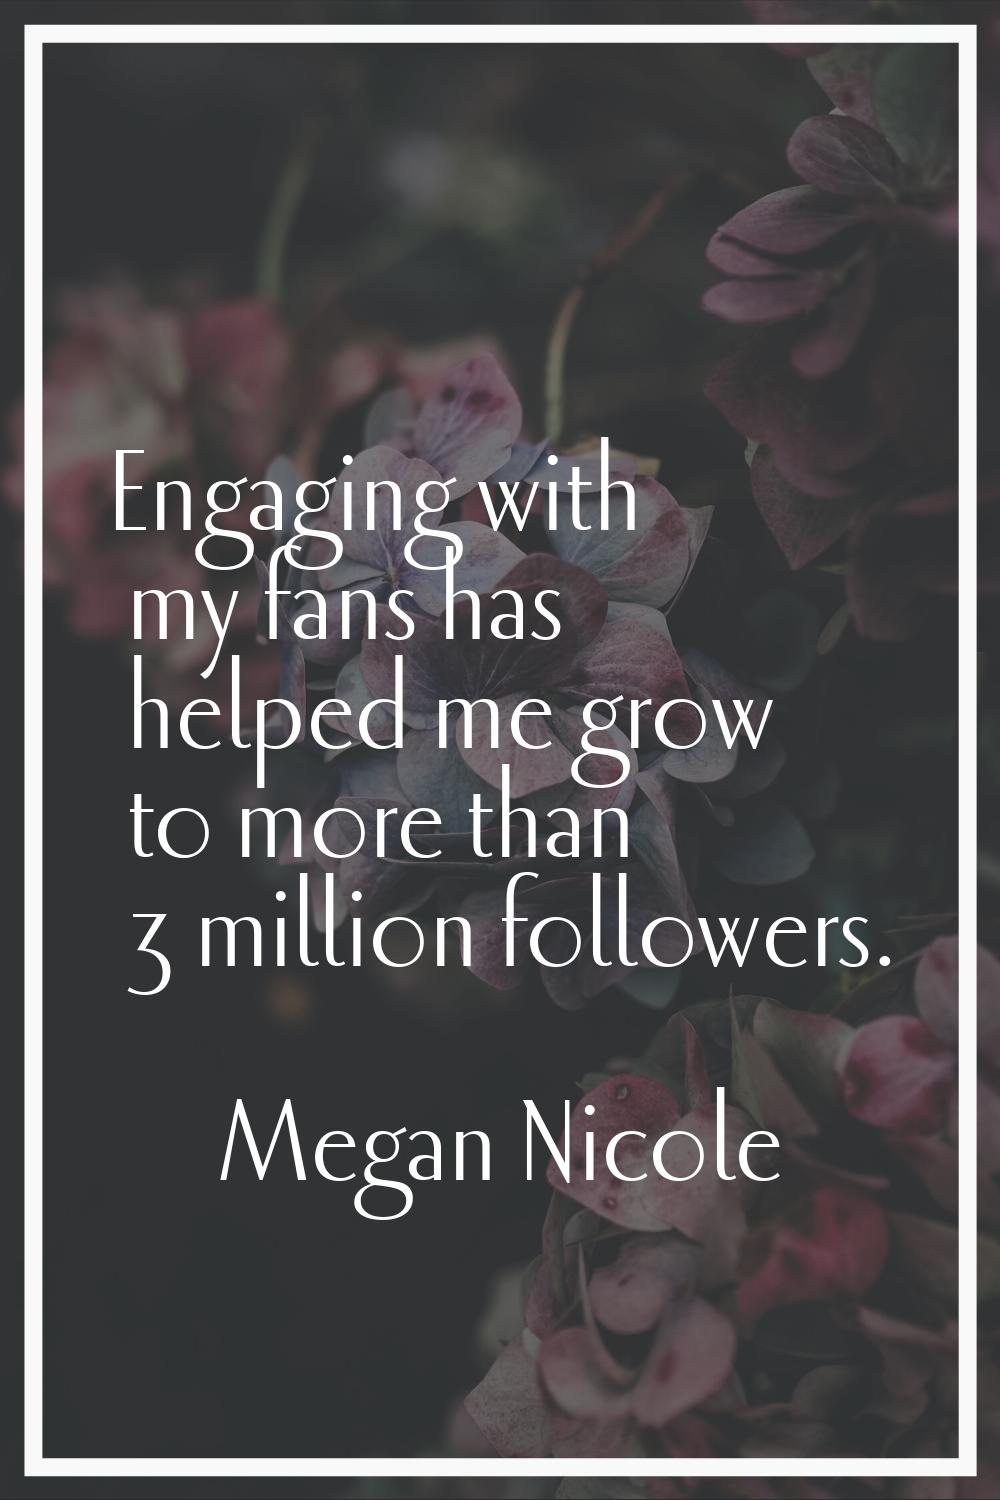 Engaging with my fans has helped me grow to more than 3 million followers.